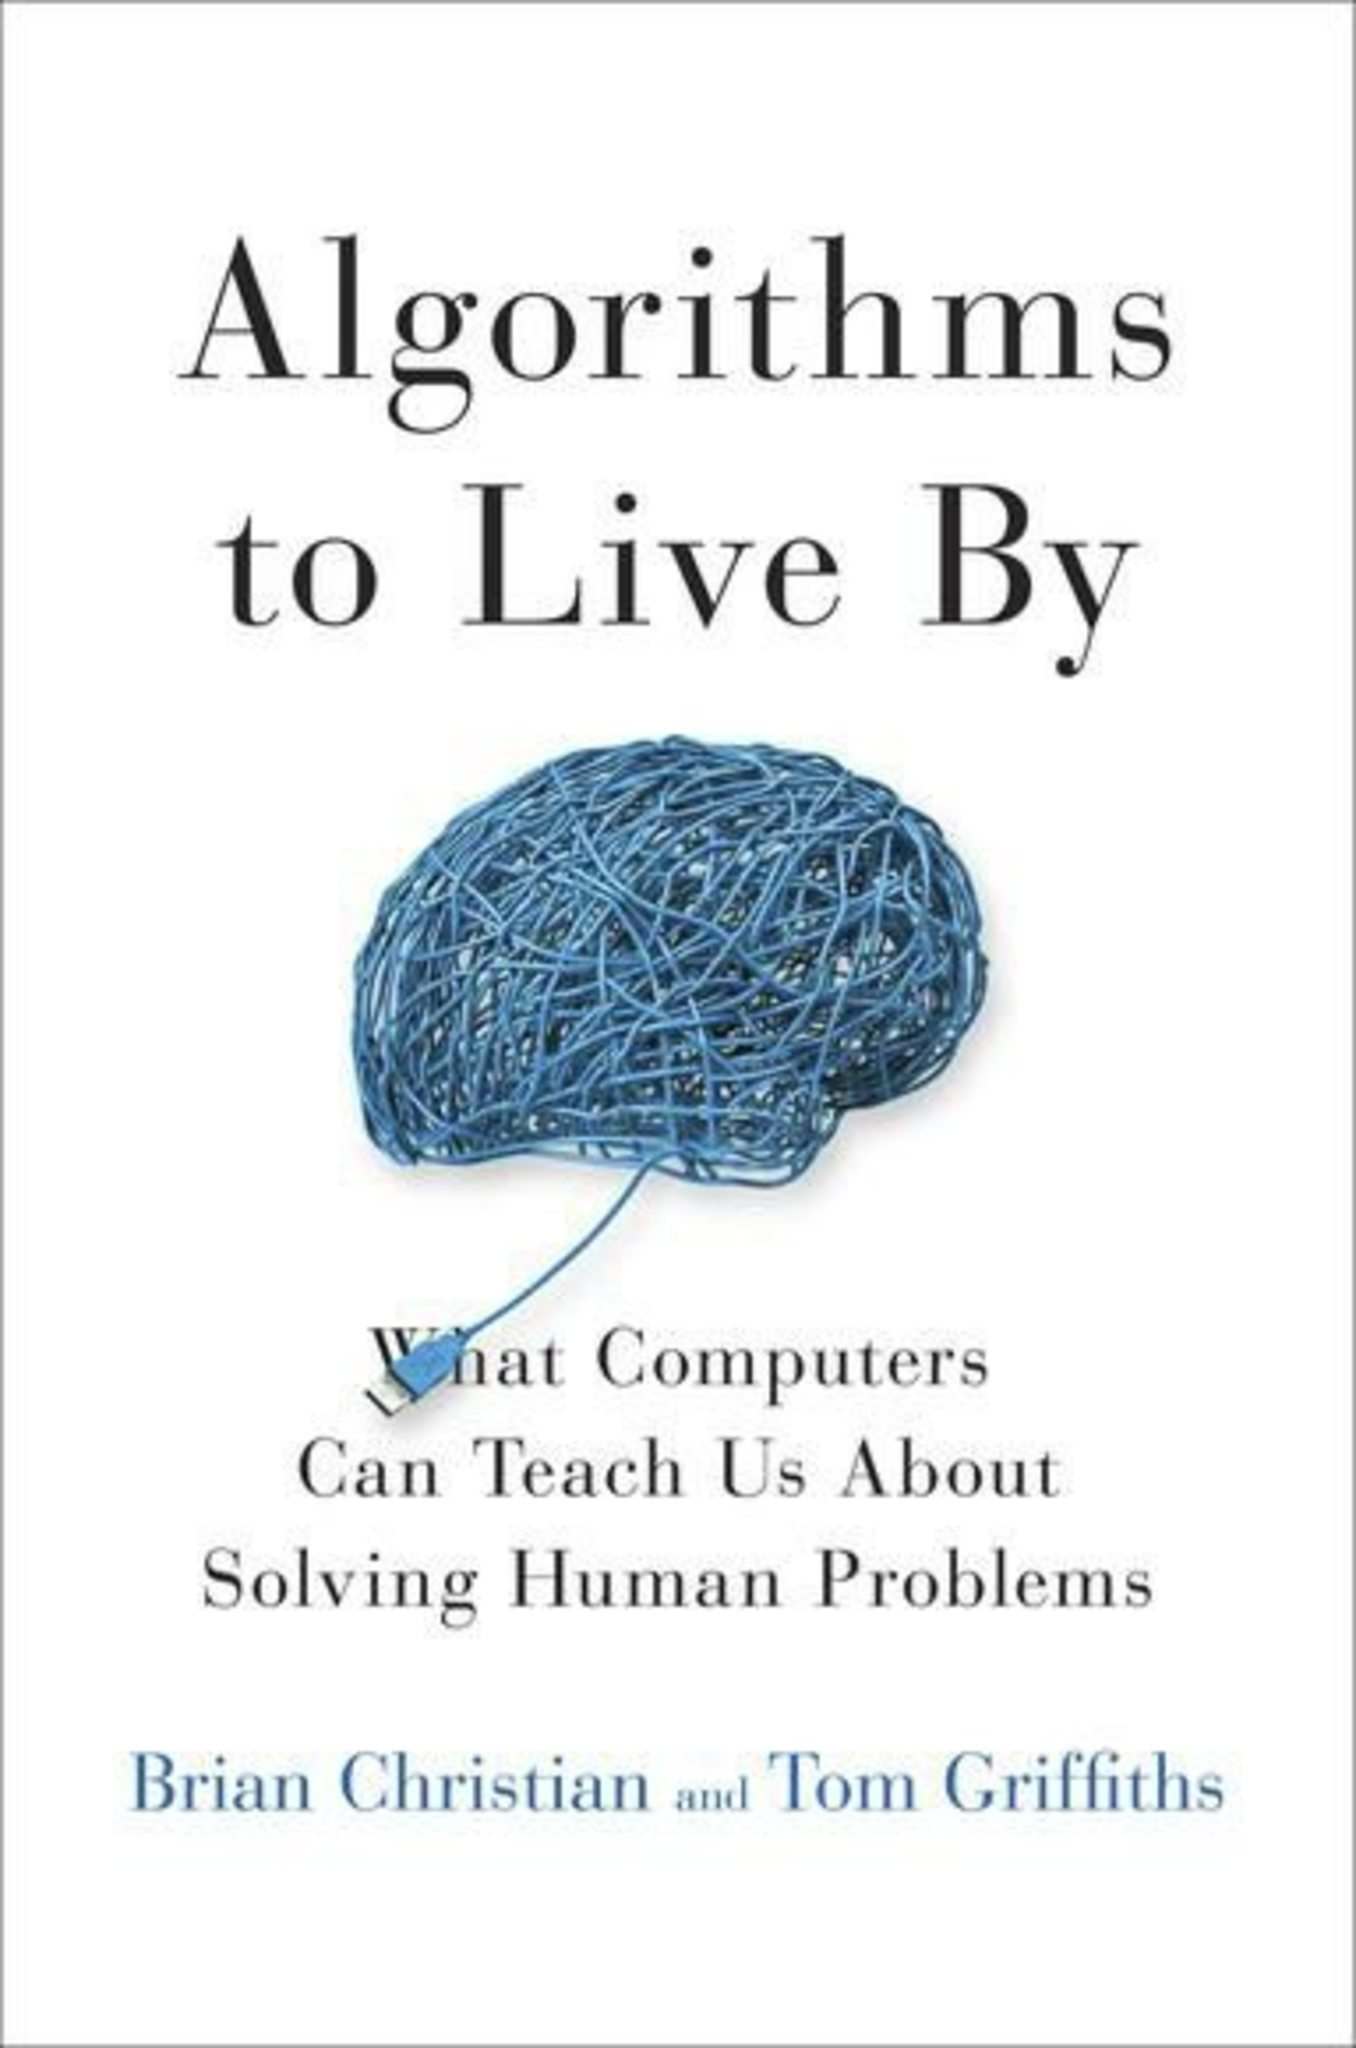 Algorithms to Live By by Brian Christian